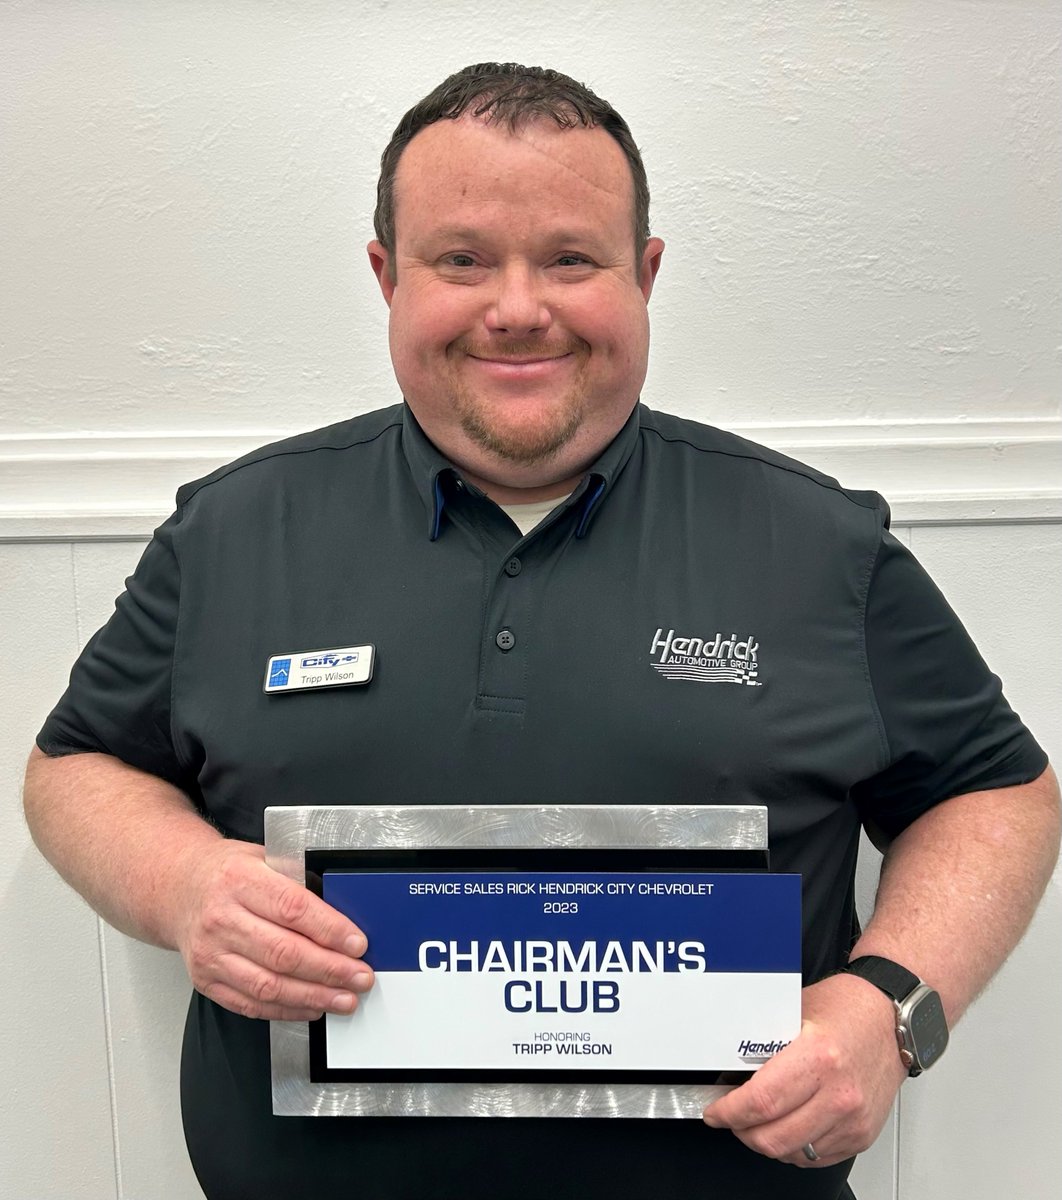 We're blessed to have the best of the best! Tripp Wilson, Service Advisor, has won Chairman's Club so many times, he has lost count (like 13 or 14 years!) And he's #1 in the Domestic Group! Grateful for his loyal customers for being with him for all these years! @HendrickCars